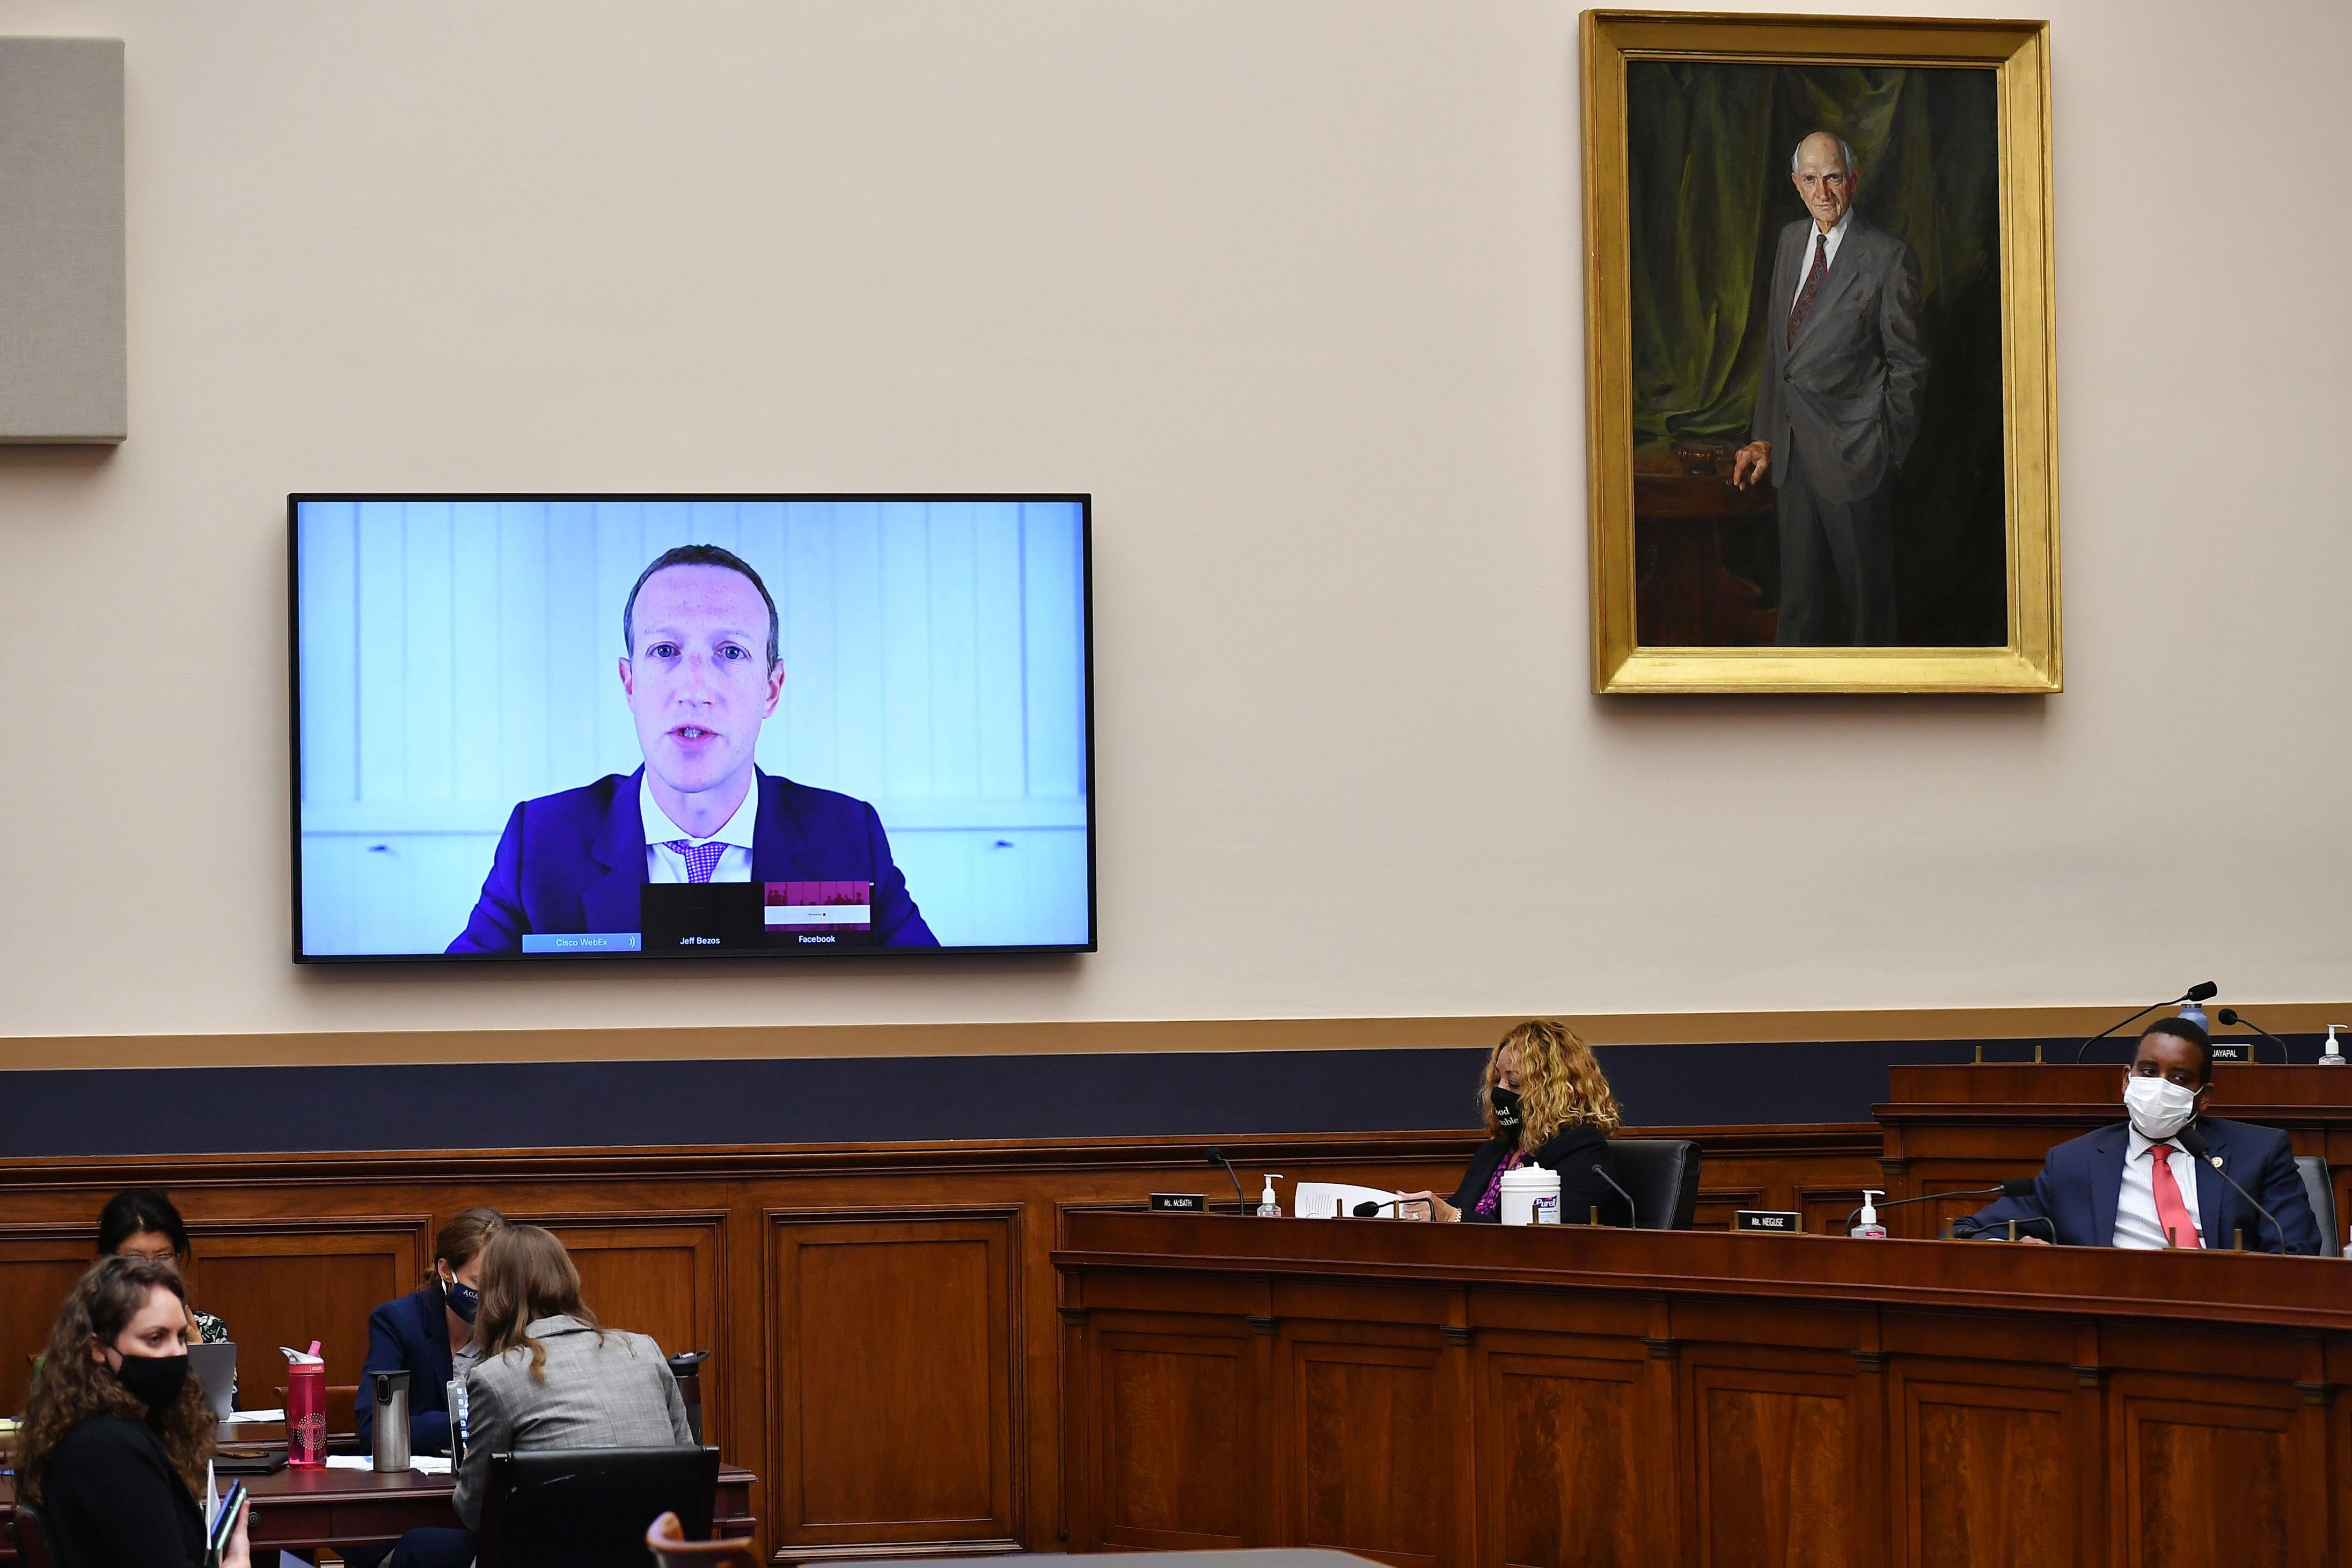 Mark Zuckerberg on a TV screen testifying before the House Judiciary Subcommittee on Antitrust, Commercial, and Administrative Law on July 29